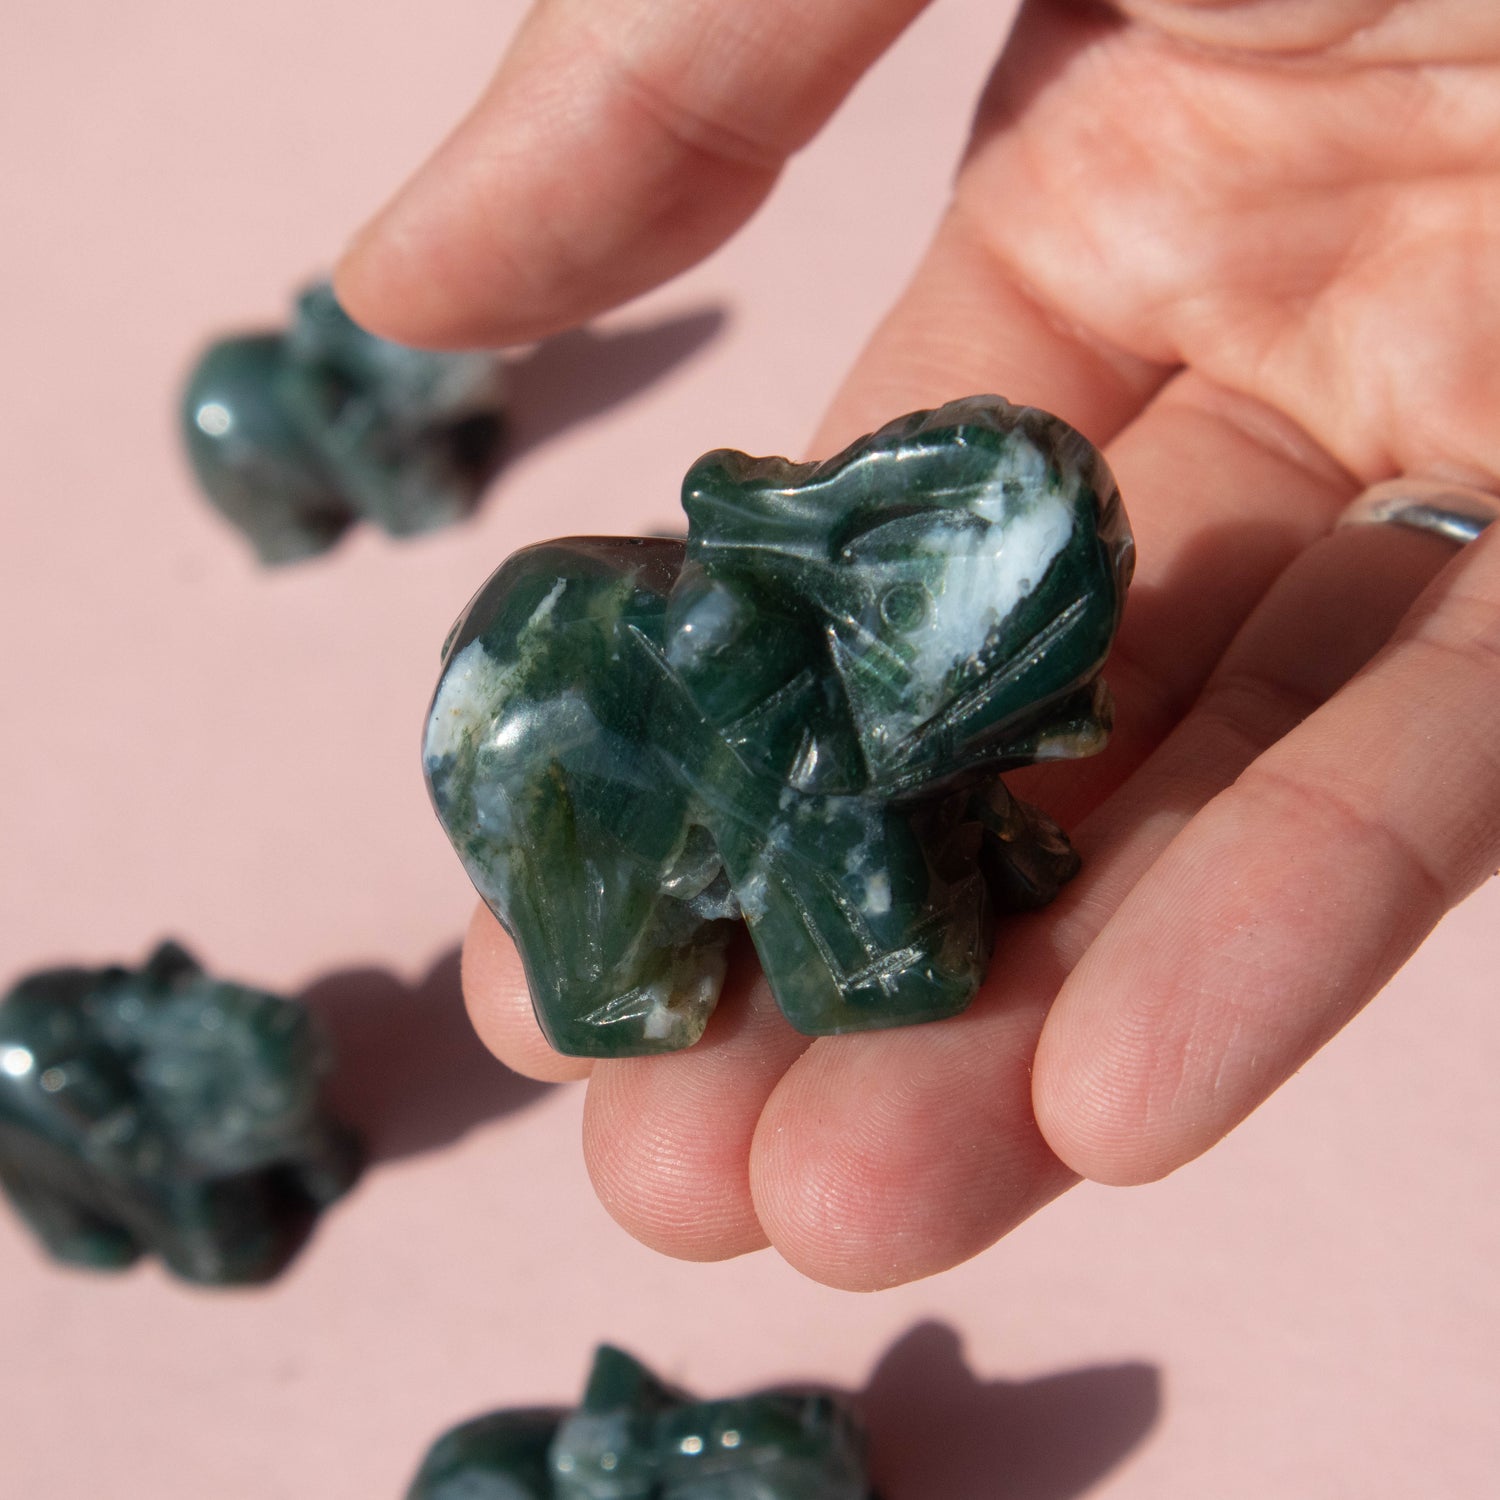 moss agate, moss agate elephant, moss agate animal, crystal animal, crystal elephant, gemstone elephant, gemstone animal, moss agate crystal, moss agate stone, moss agate properties, moss agate healing properties, moss agate metaphysical properties, moss agate meaning